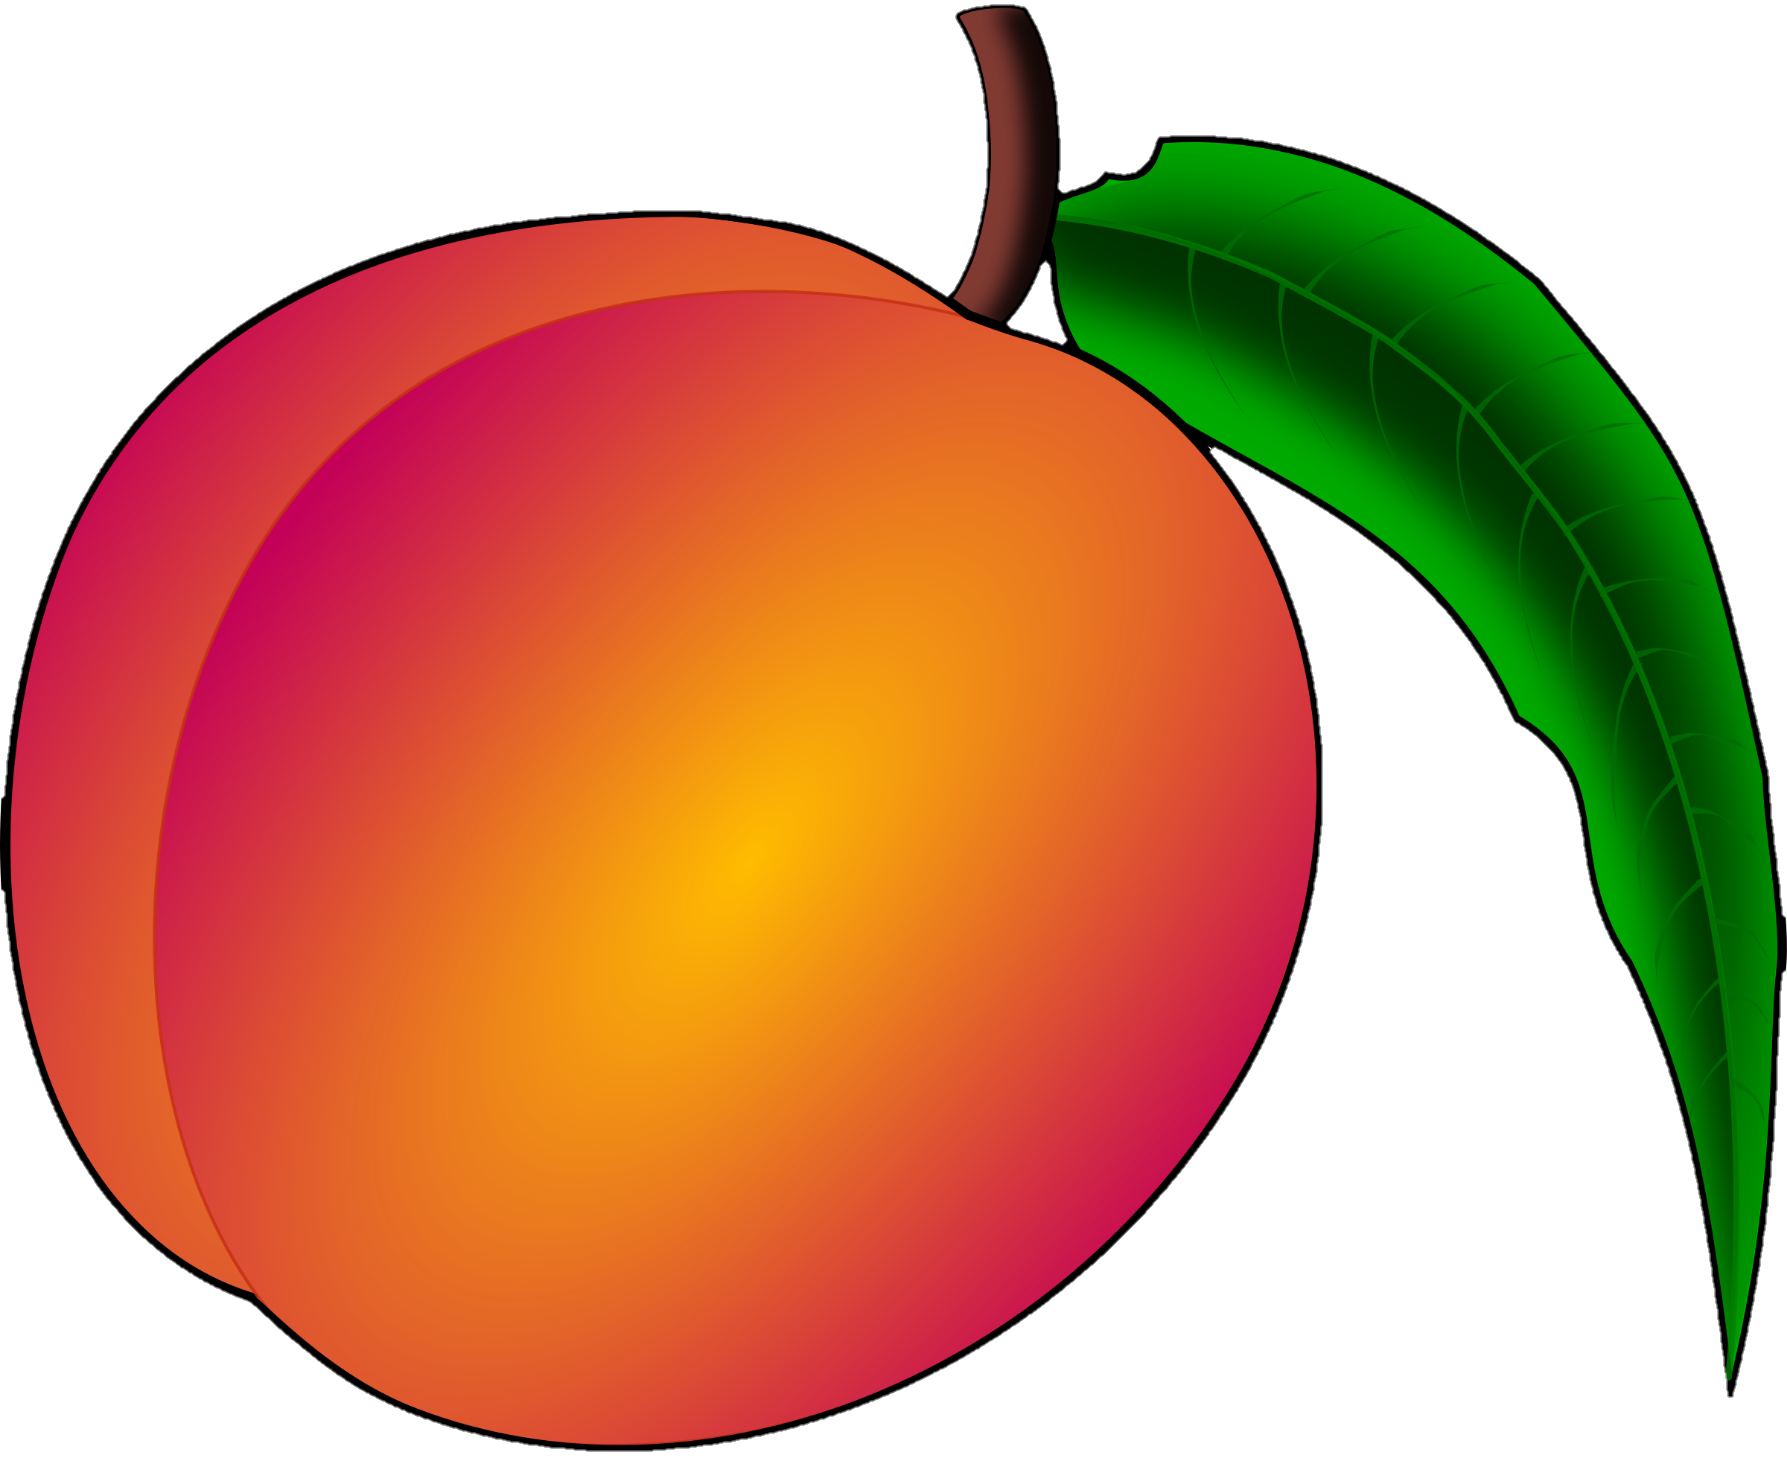 peach-png-image-from-pngfre-41